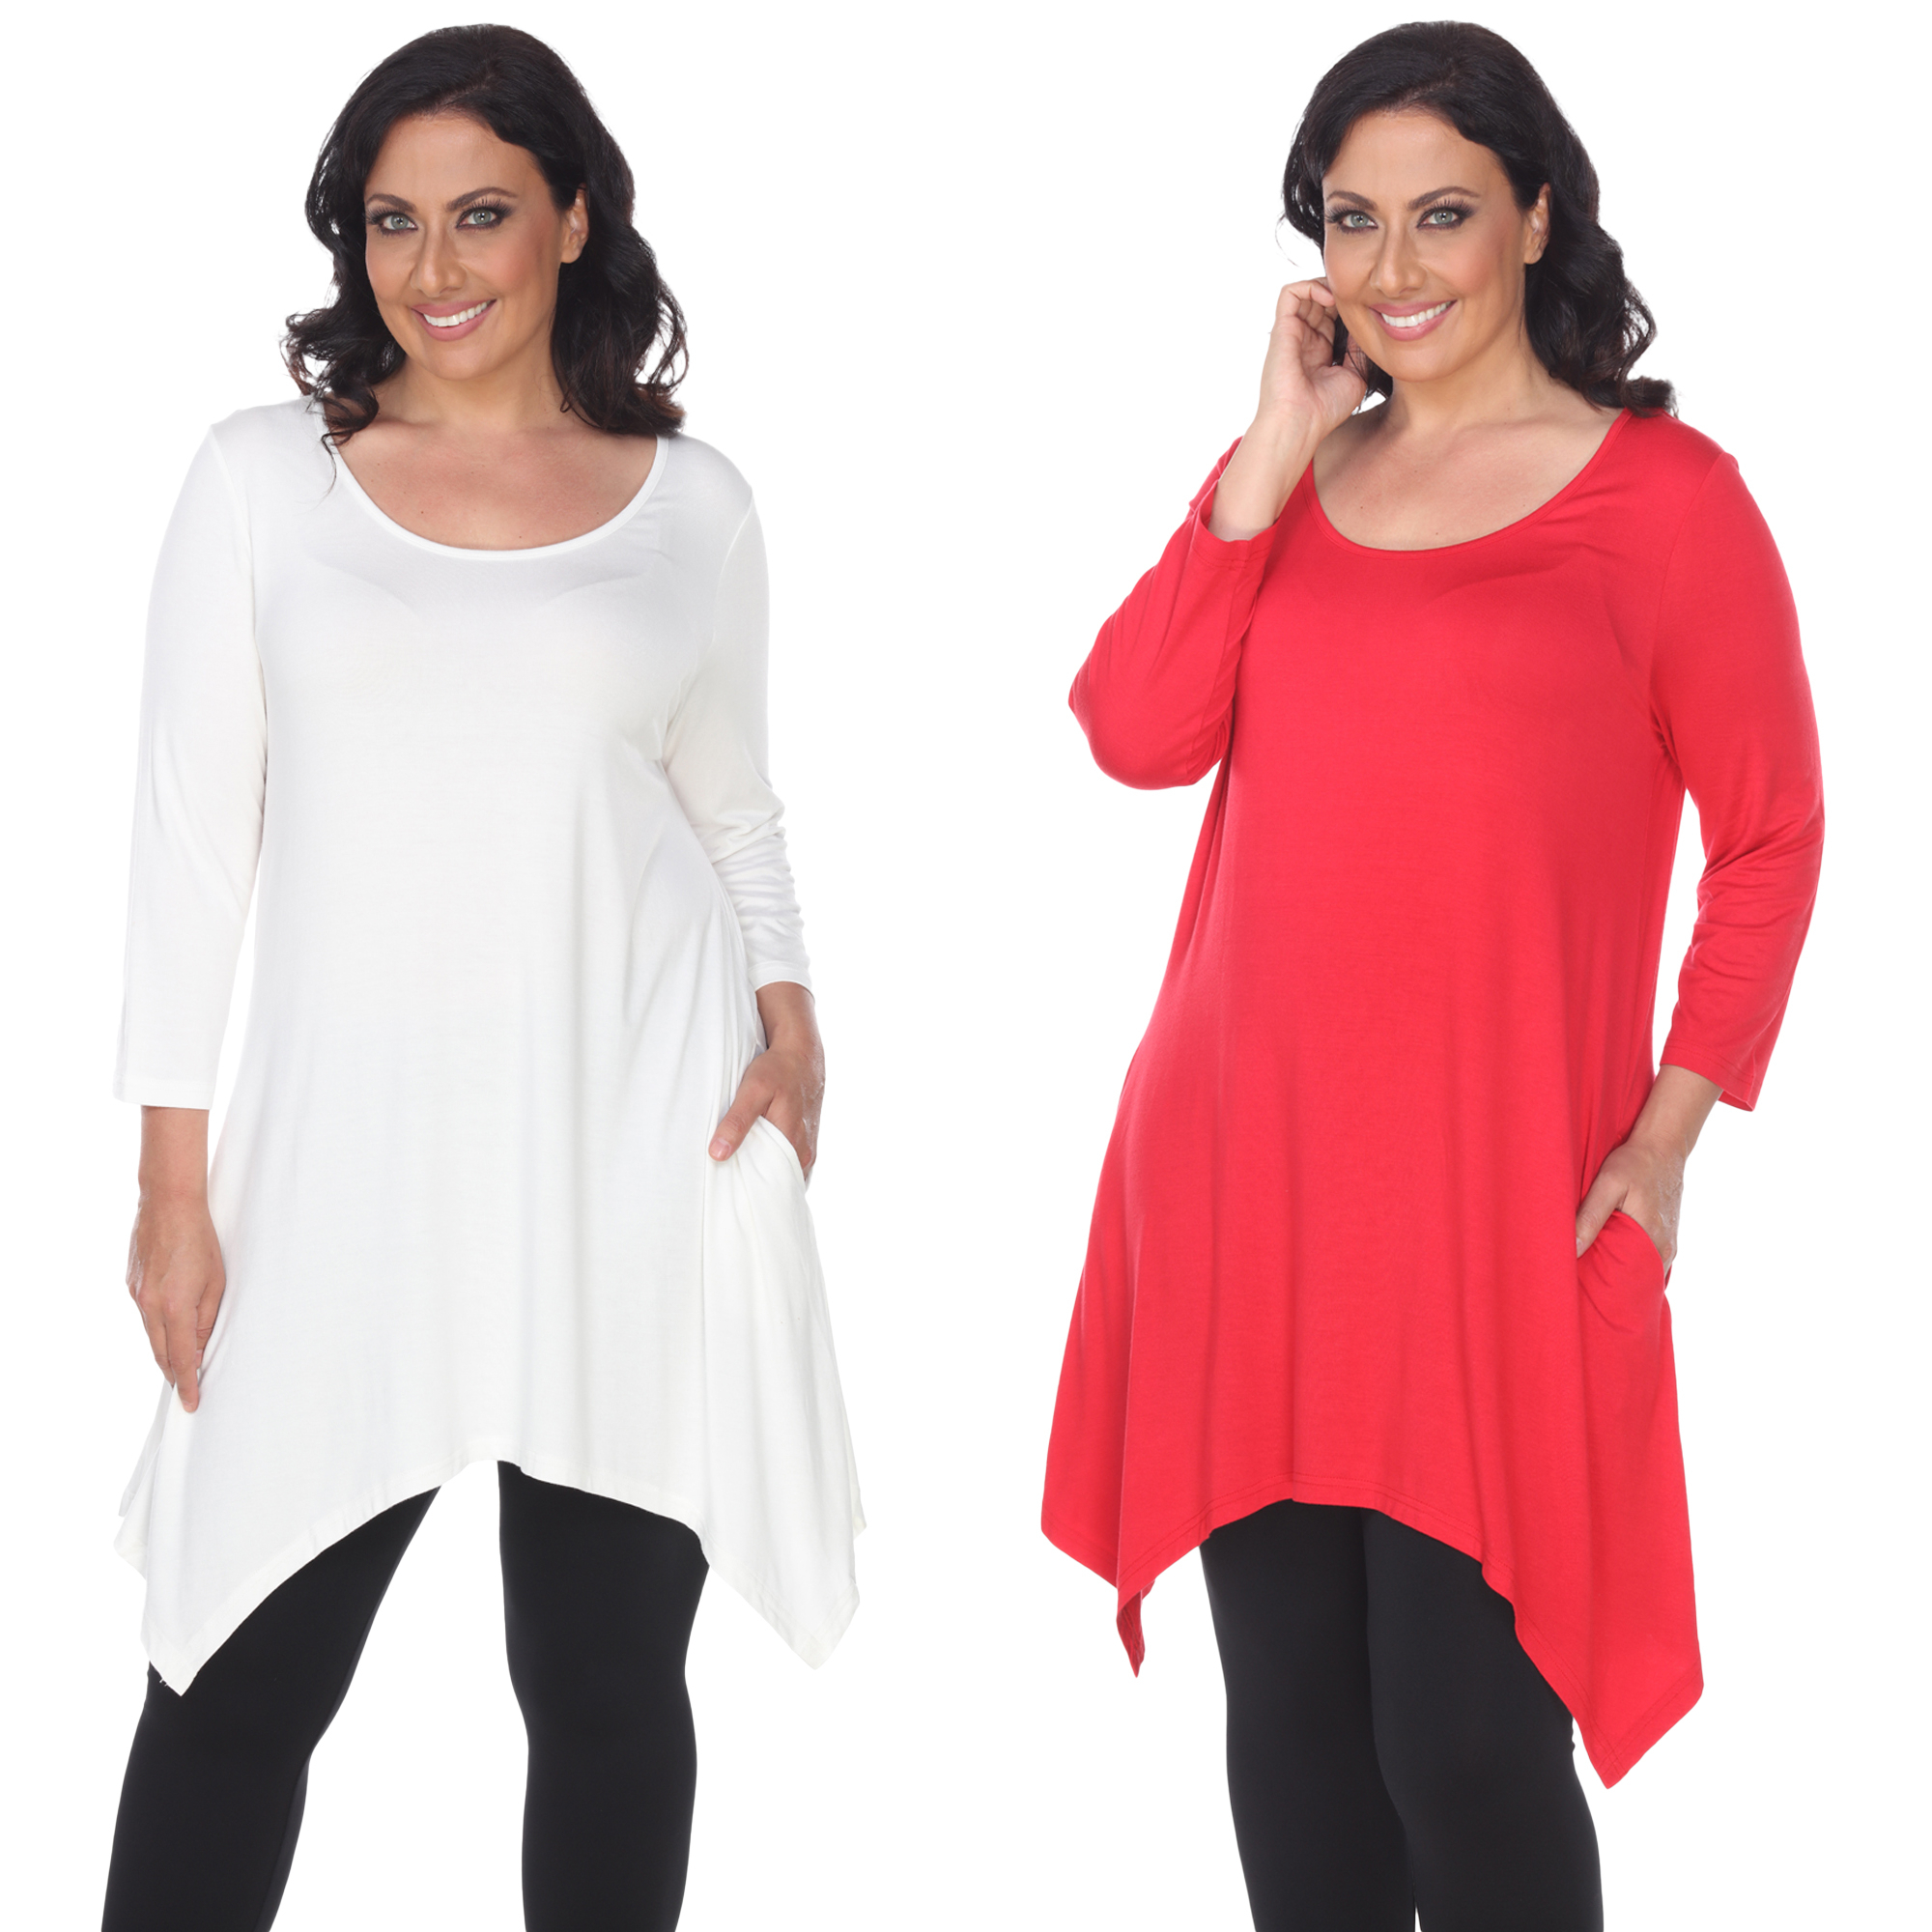 White Mark Women's Pack Of 2 White Tunic Top - White, Coral, Small